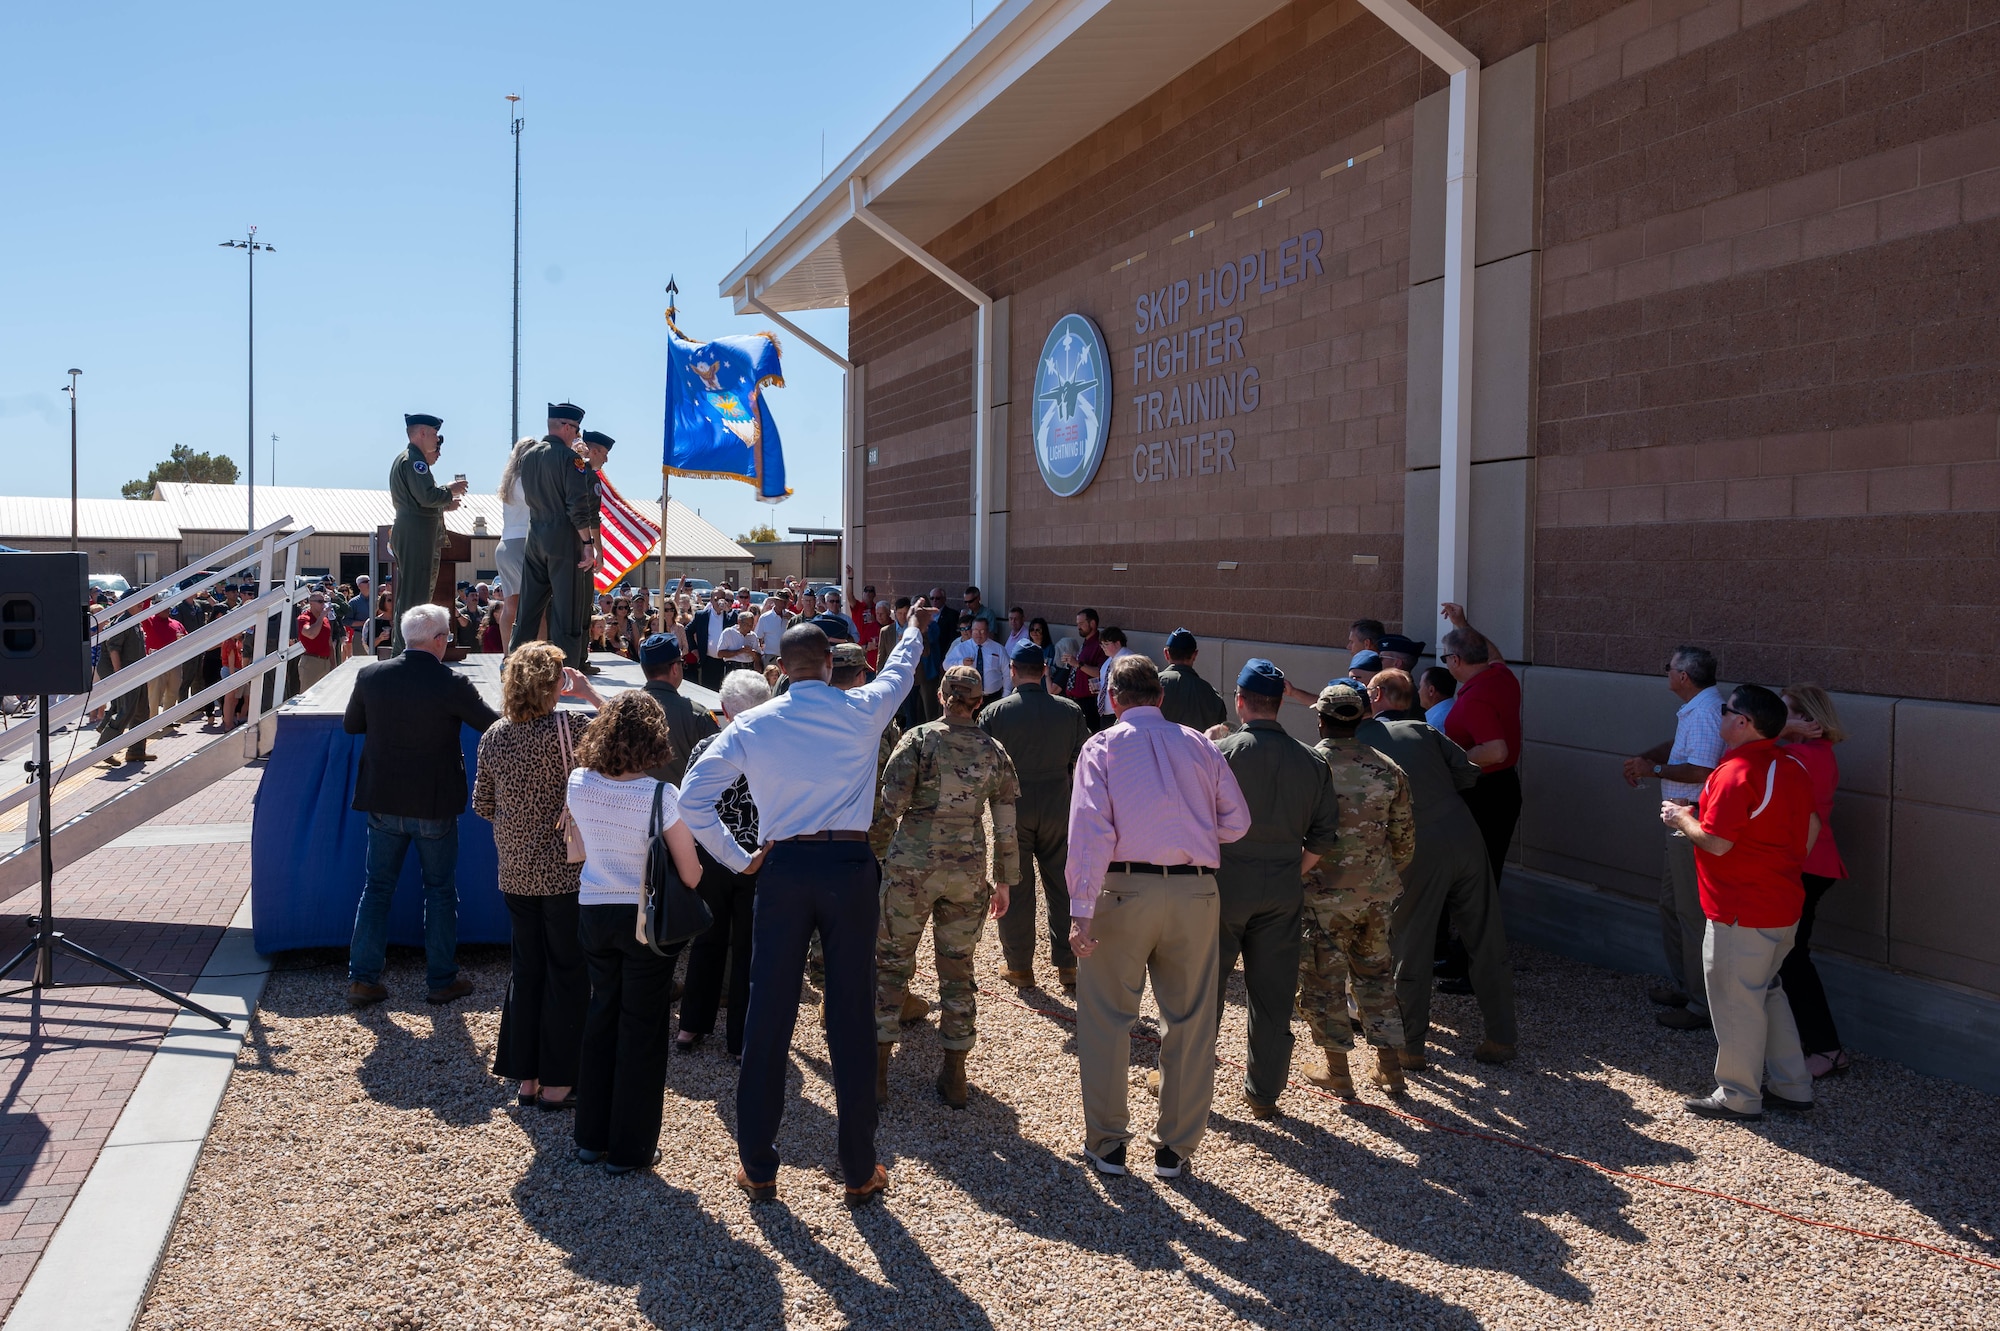 “A nickel on the grass toast” is held during the renaming ceremony of the Skip Hopler Fighter Training Center, March 29, 2024, at Luke Air Force Base, Arizona.